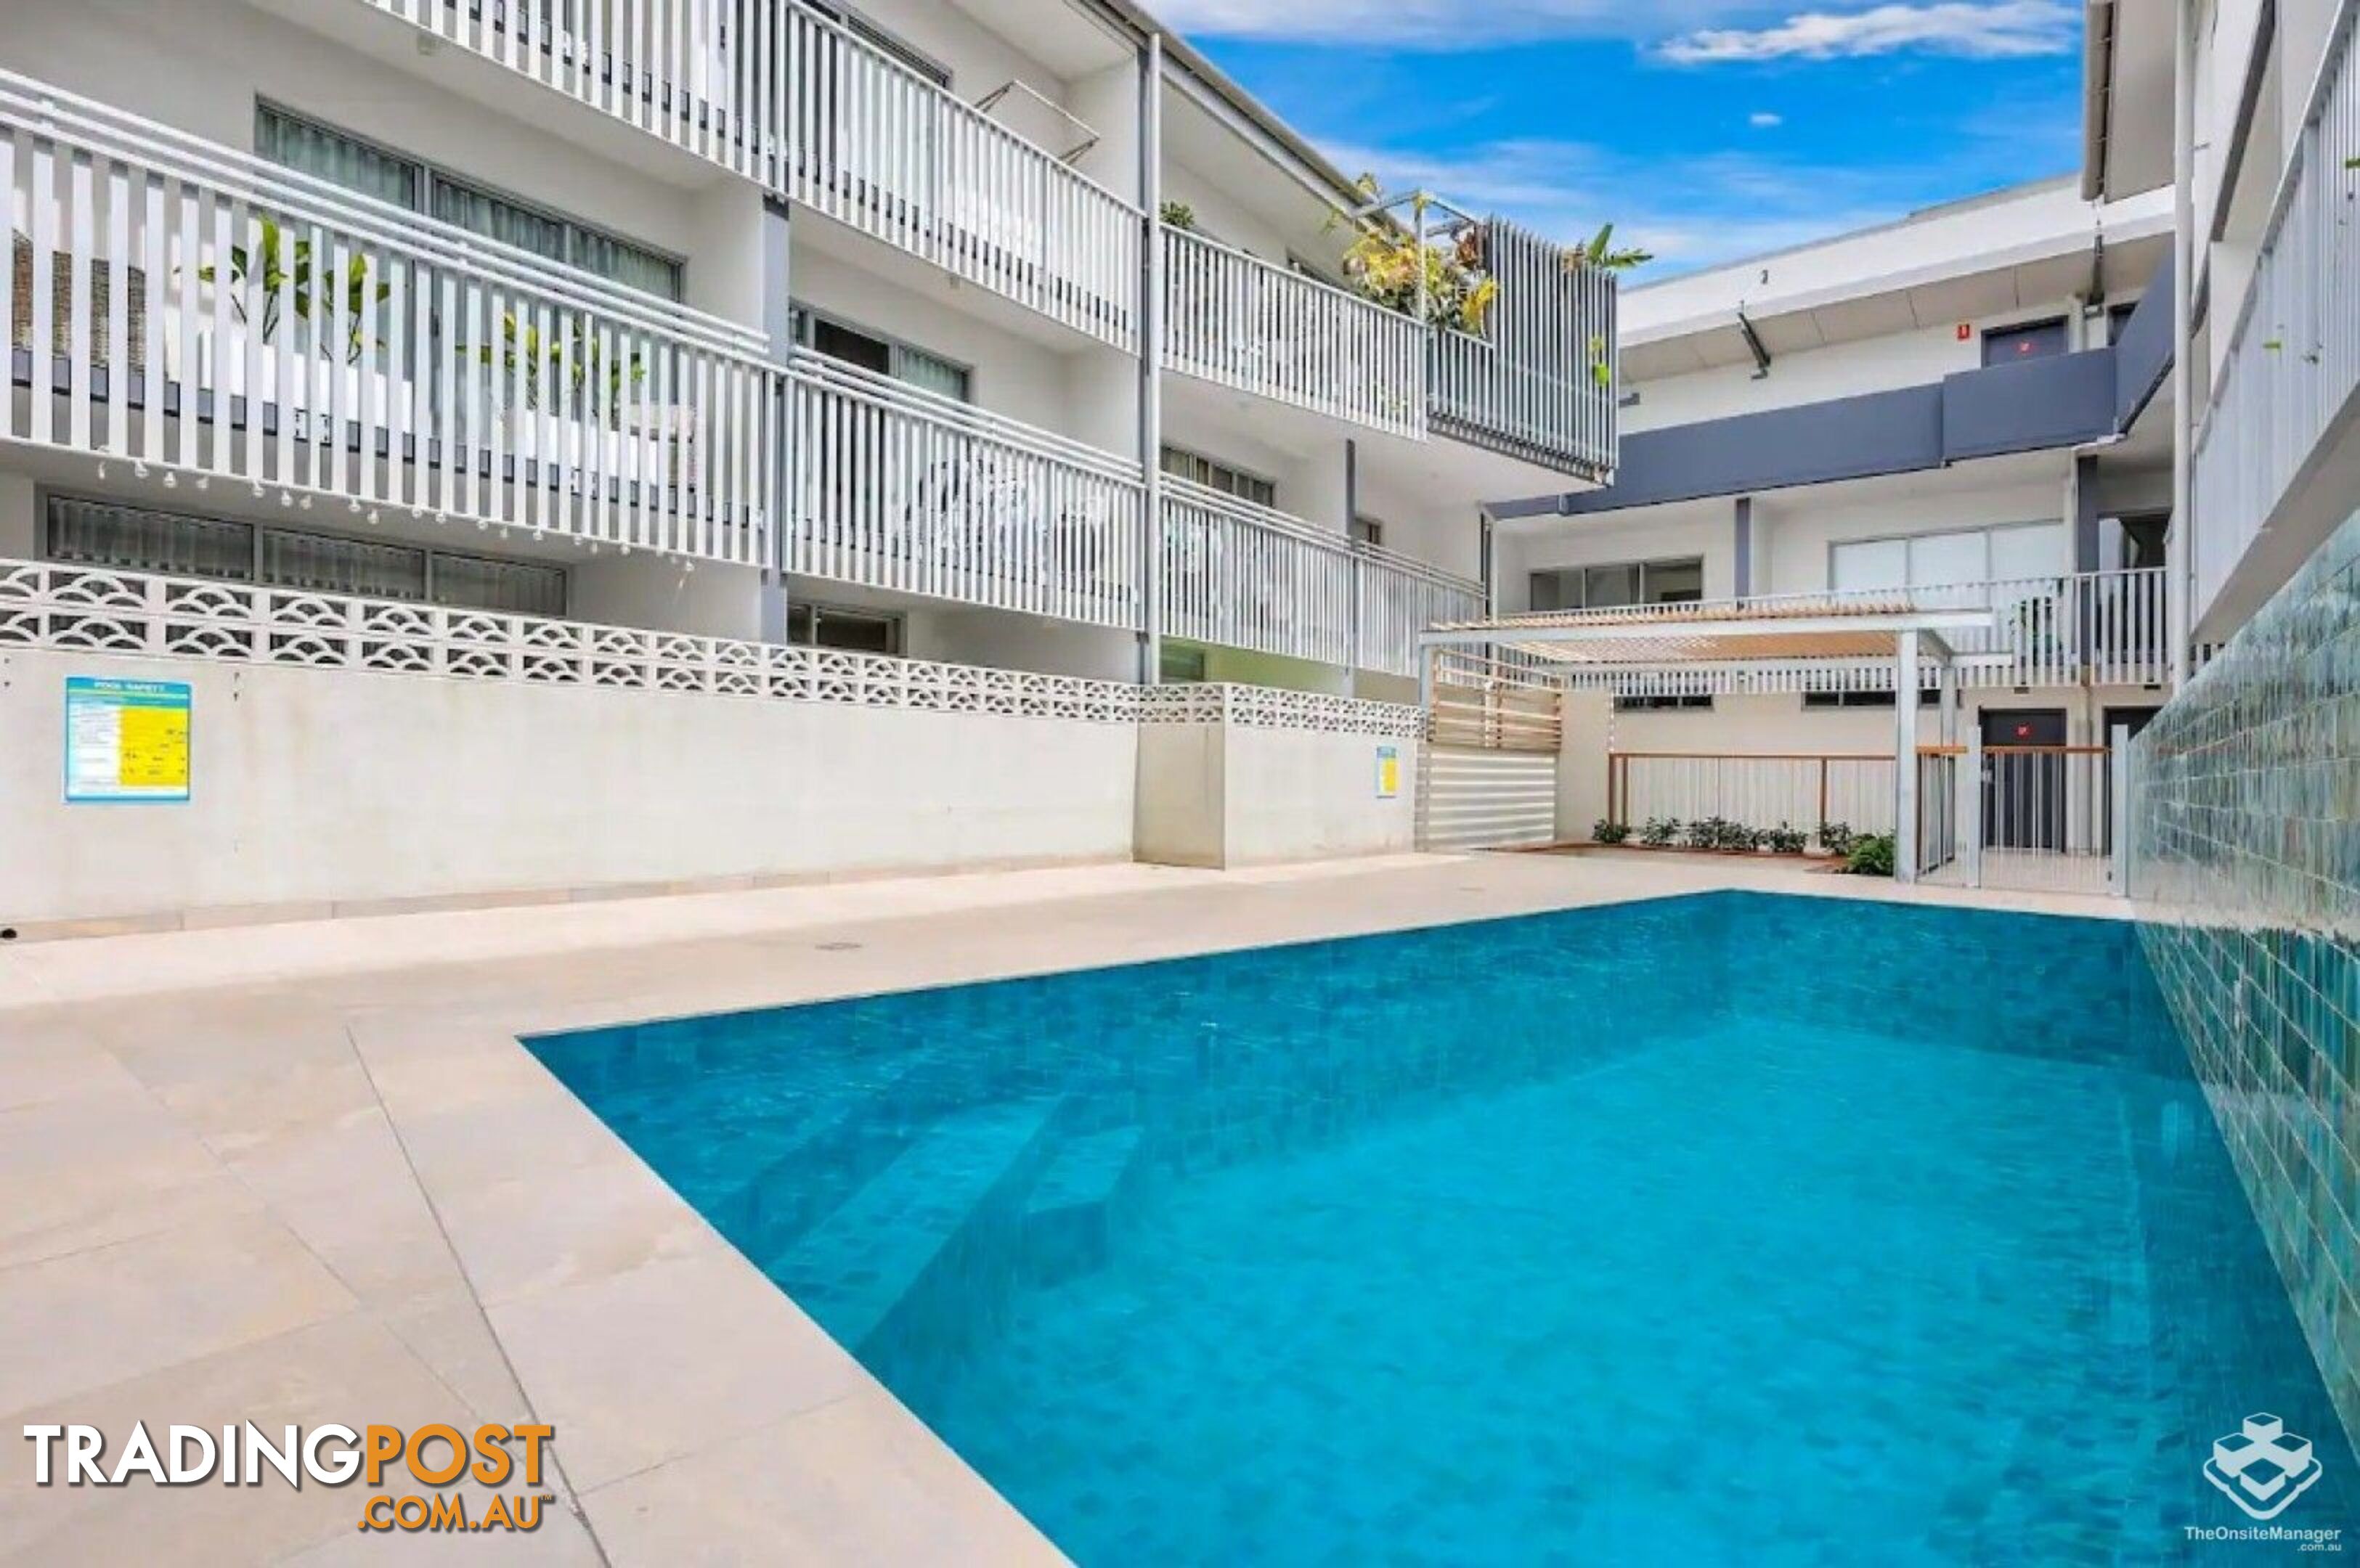 36/9 Doggett Street Fortitude Valley QLD 4006